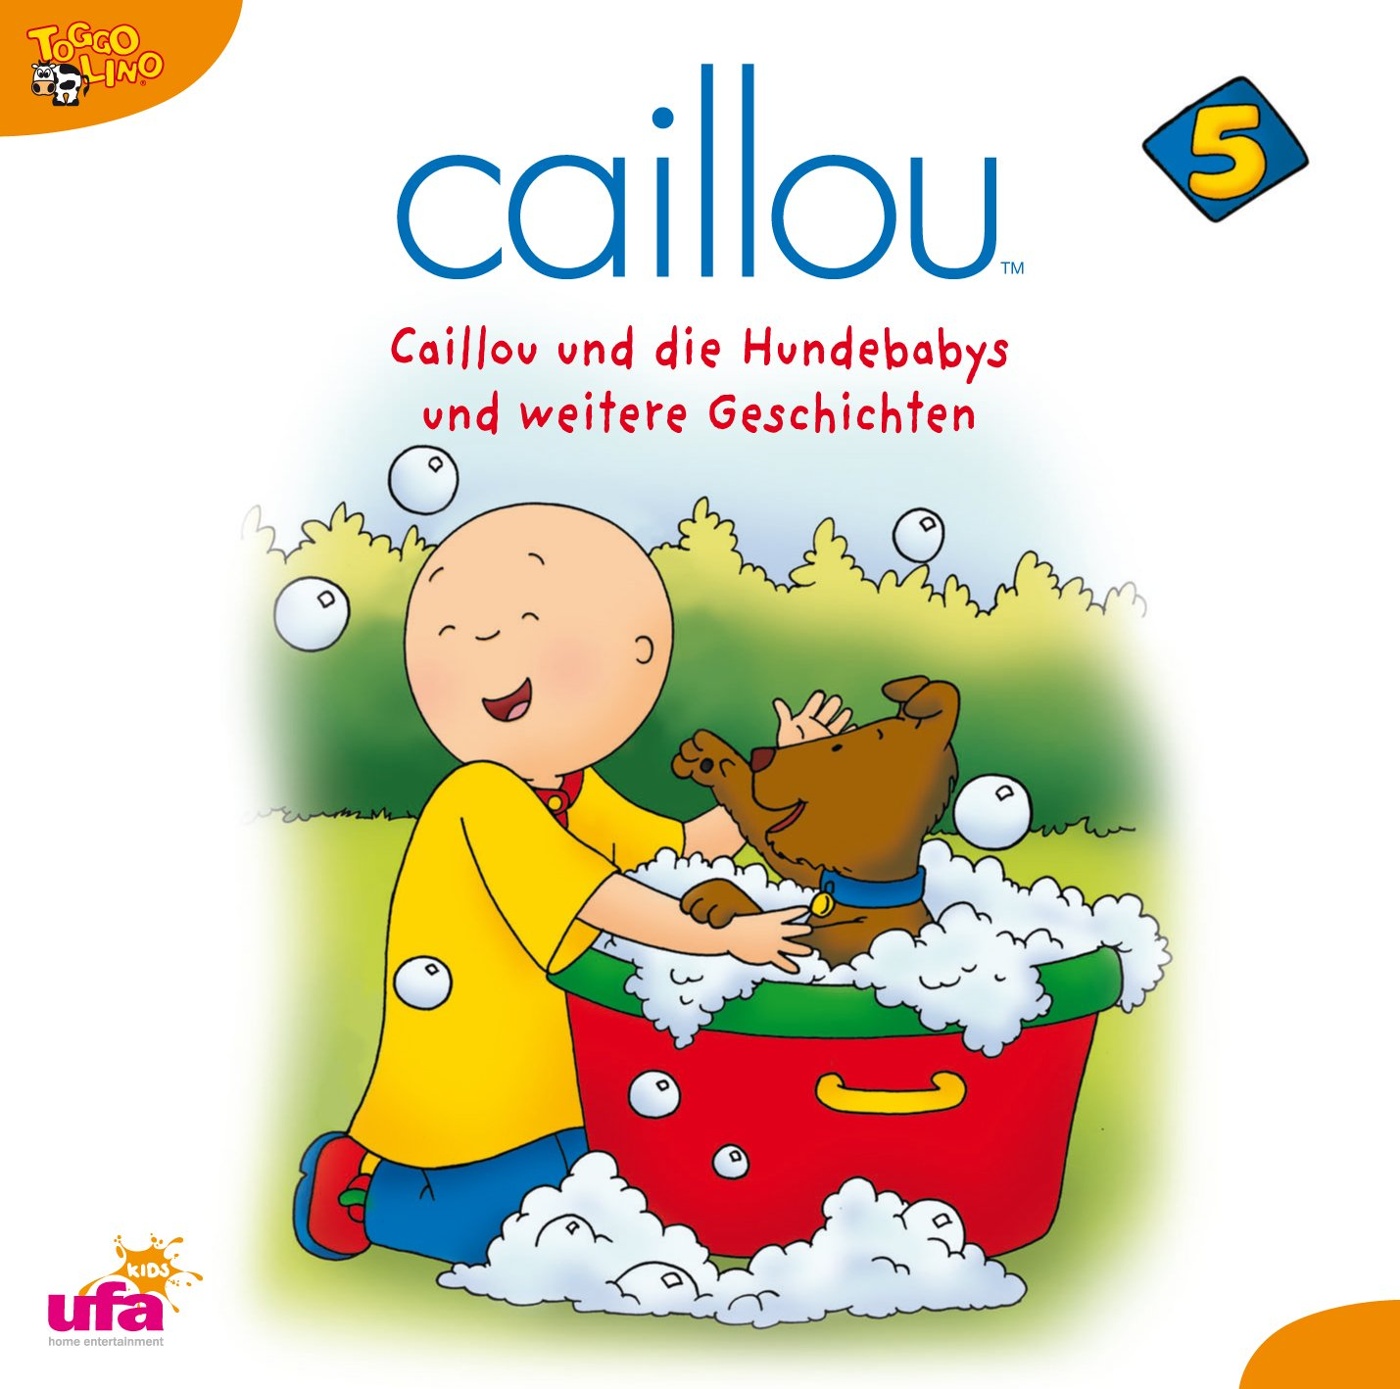 Caillou died